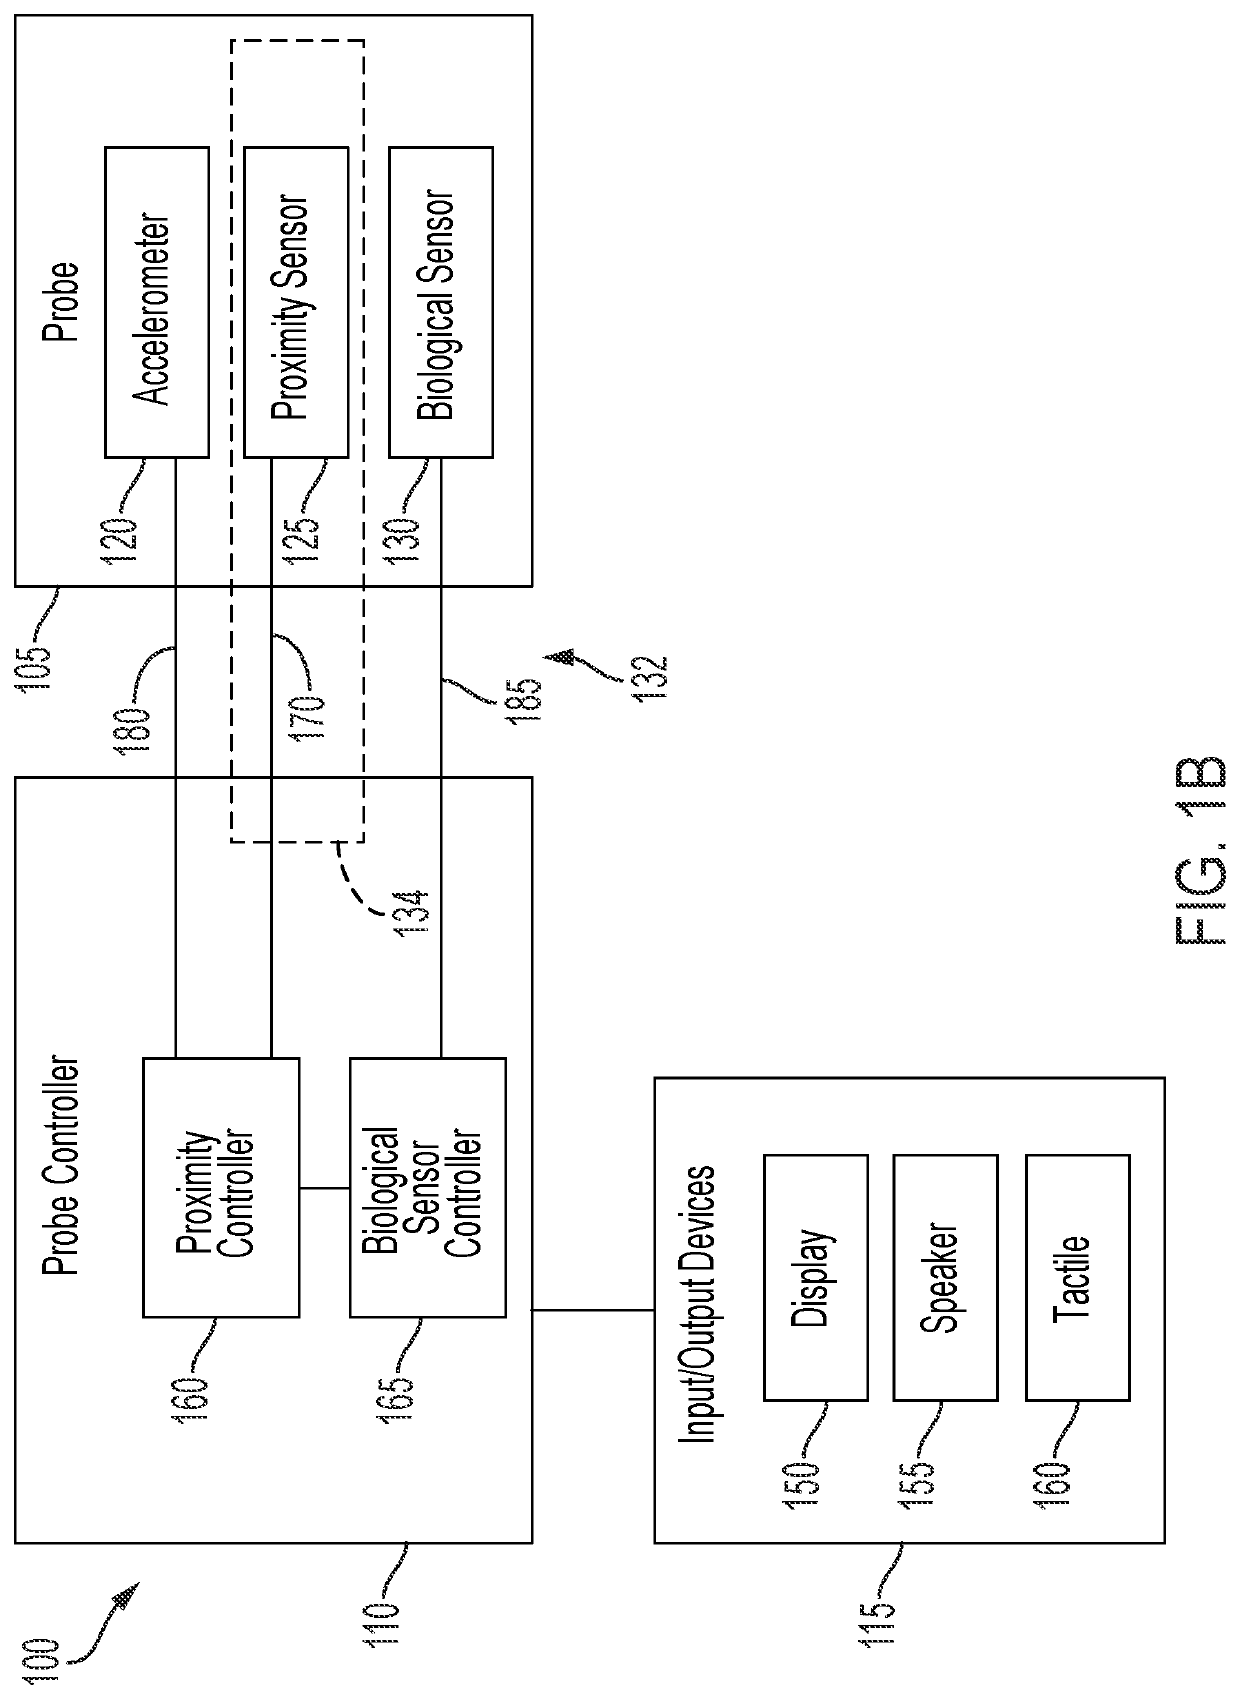 Proximity detection for assessing sensing probe attachment state